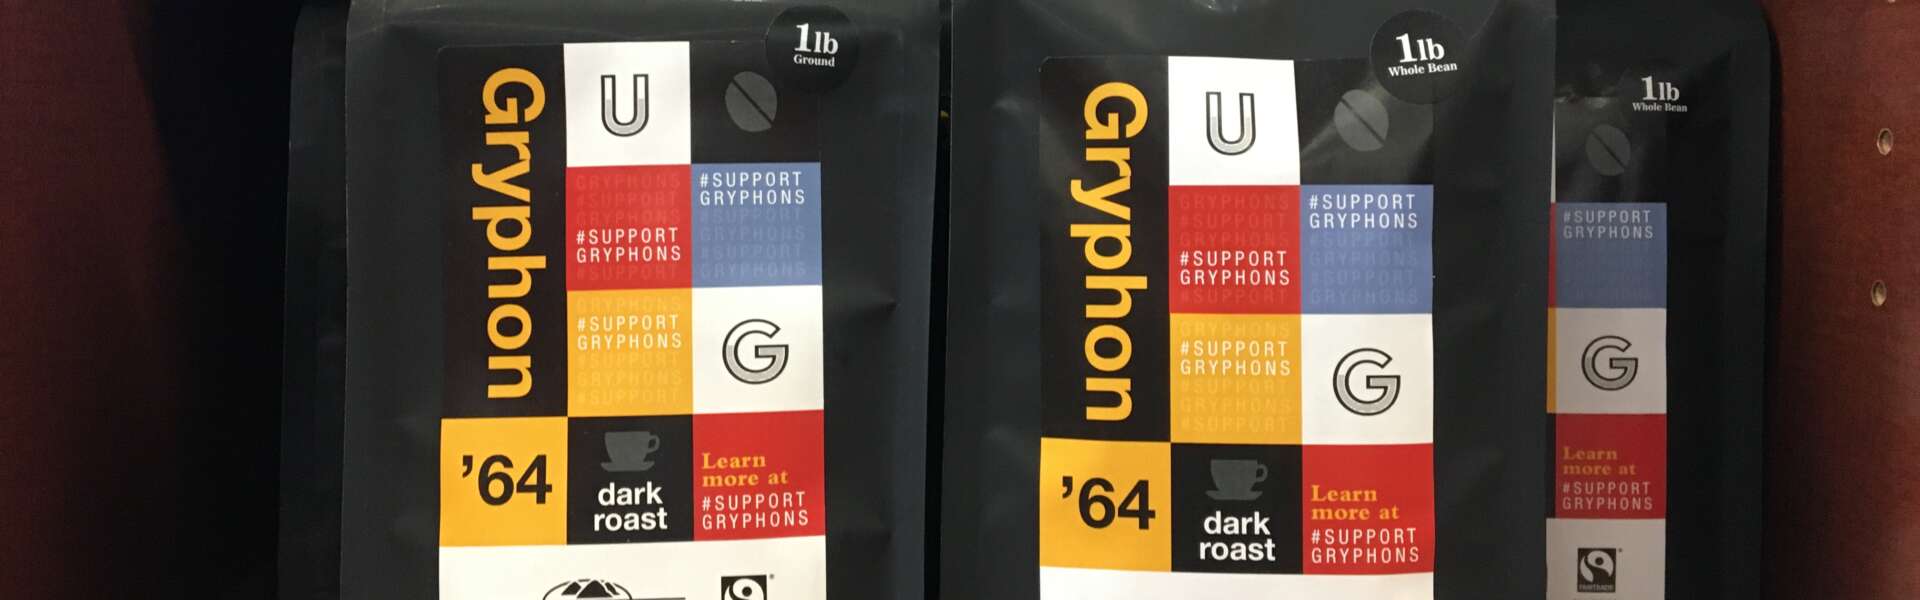 Black coffee packages with colourful designs arranged on a shelf